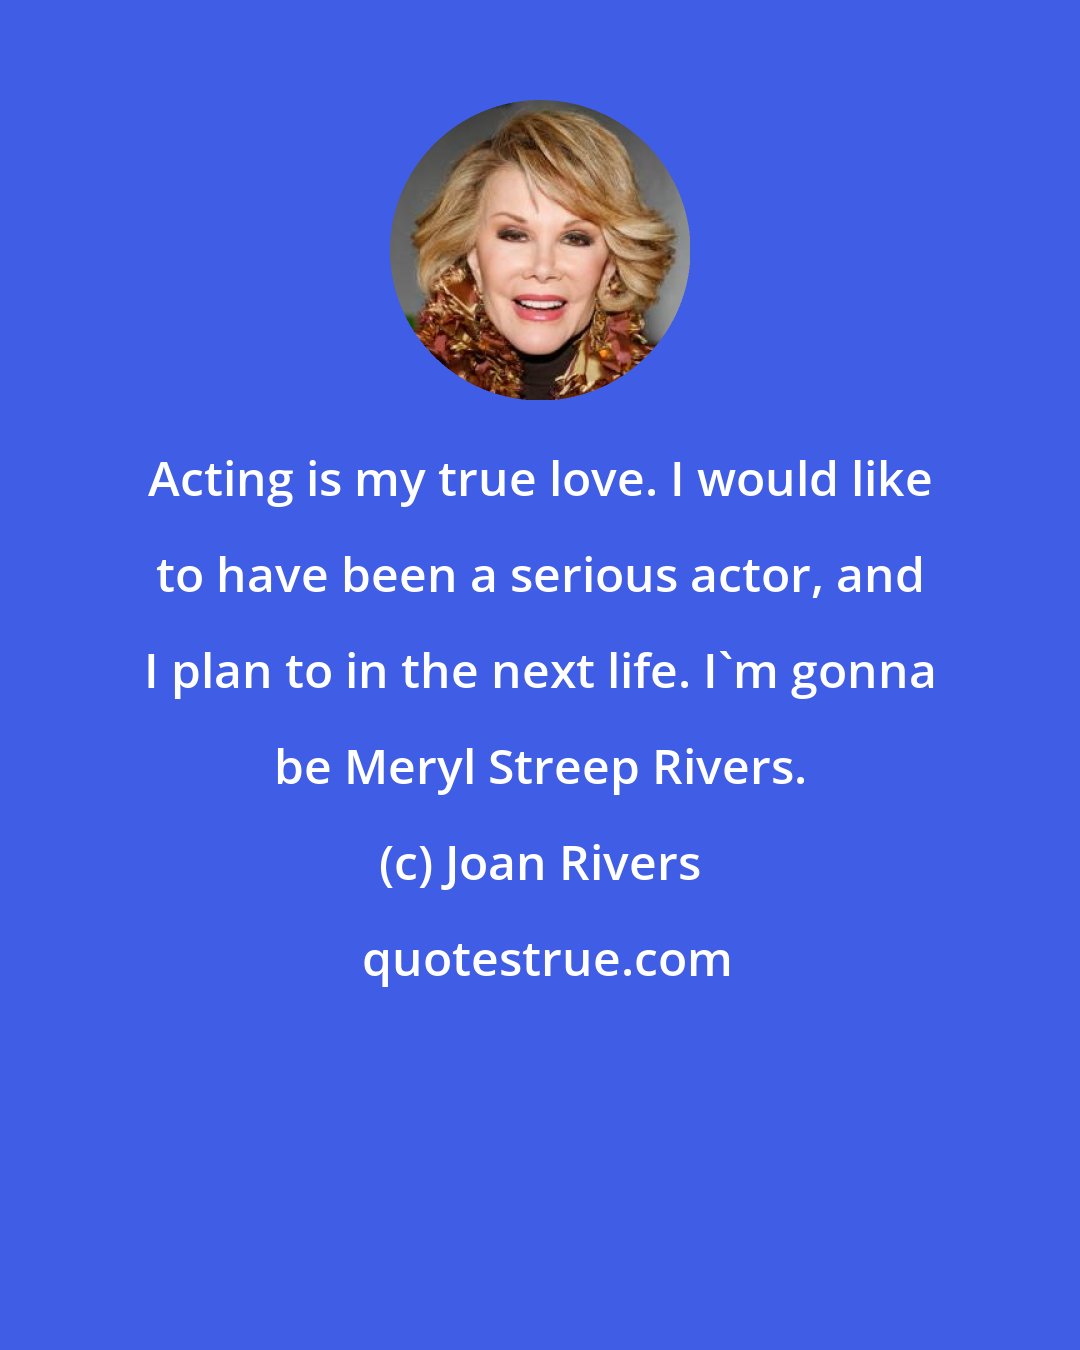 Joan Rivers: Acting is my true love. I would like to have been a serious actor, and I plan to in the next life. I'm gonna be Meryl Streep Rivers.